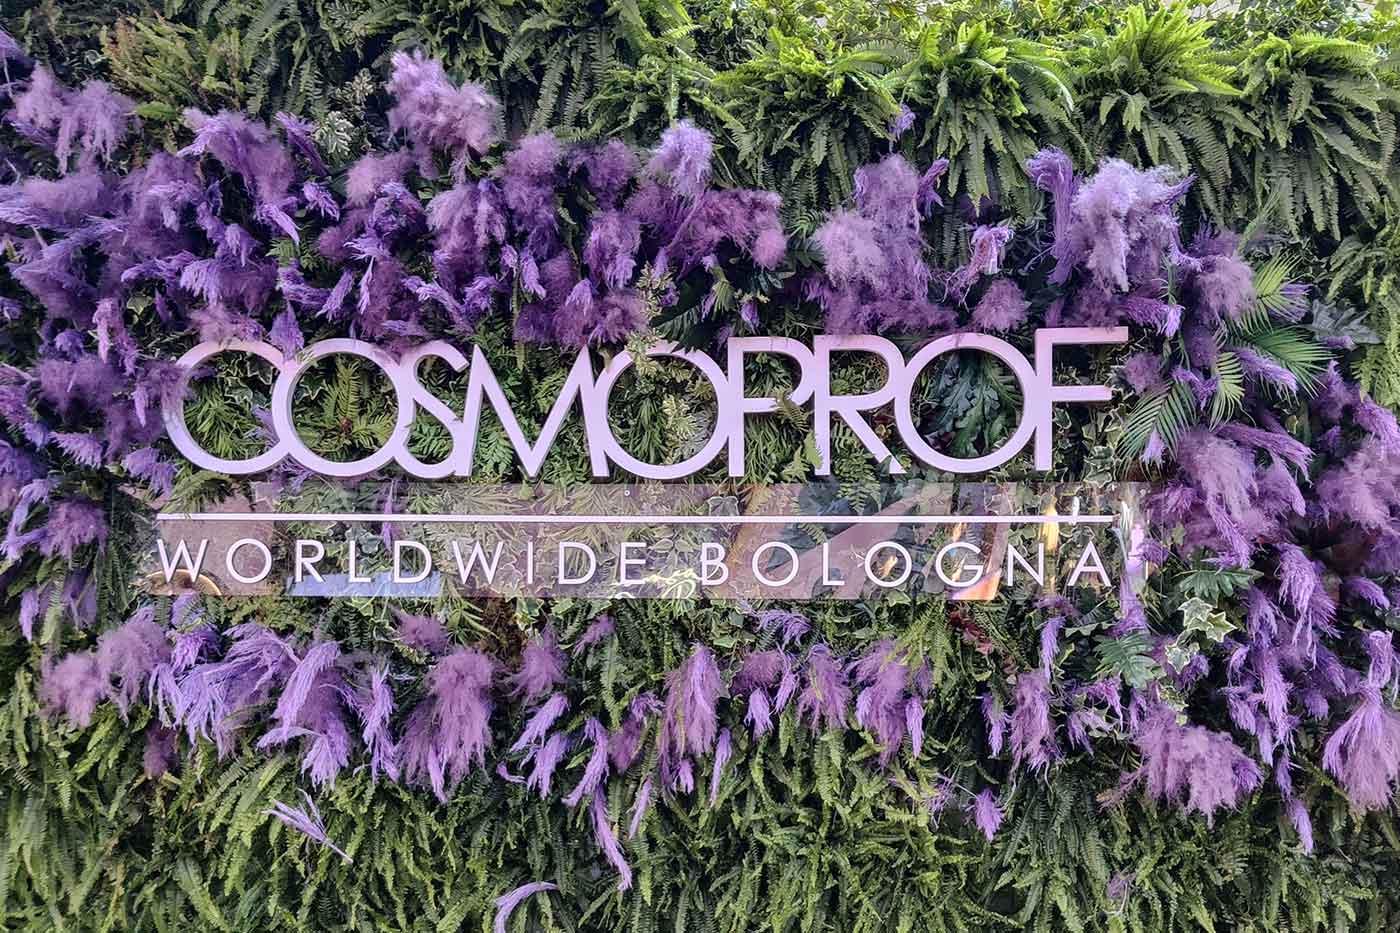 Cosmoprof Worldwide Bologna draws record industry visitors from around the world